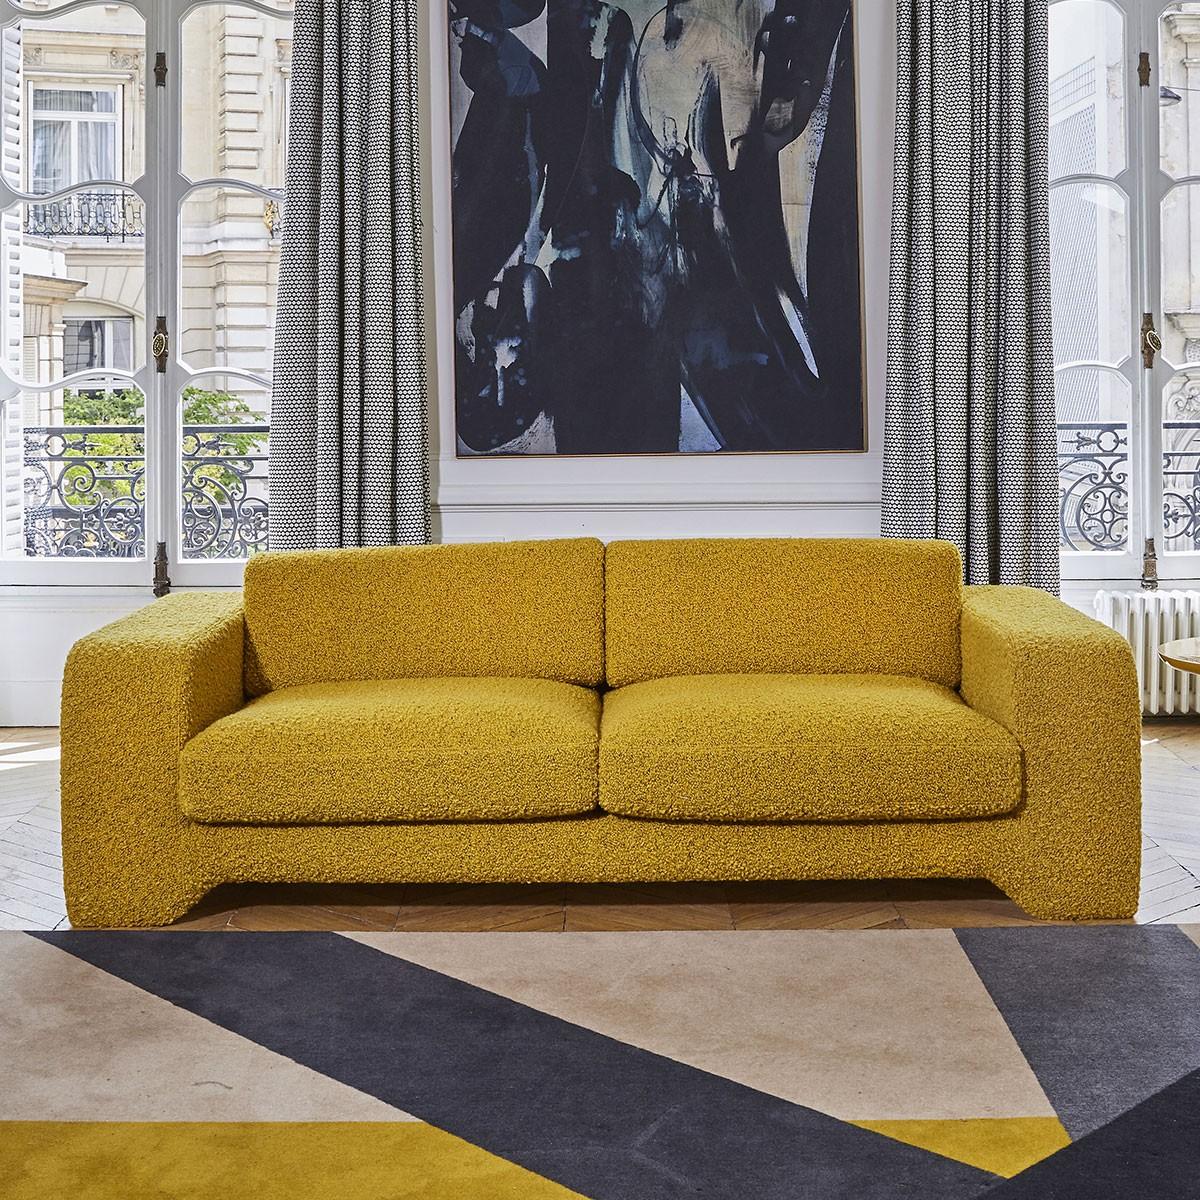 Popus editions Giovanna 4 seater sofa in green (772256) como velvet upholstery.

Giovanna is a sofa with a strong profile. A sober, plush line, with this famous detail that changes everything, so as not to forget its strength of character and this